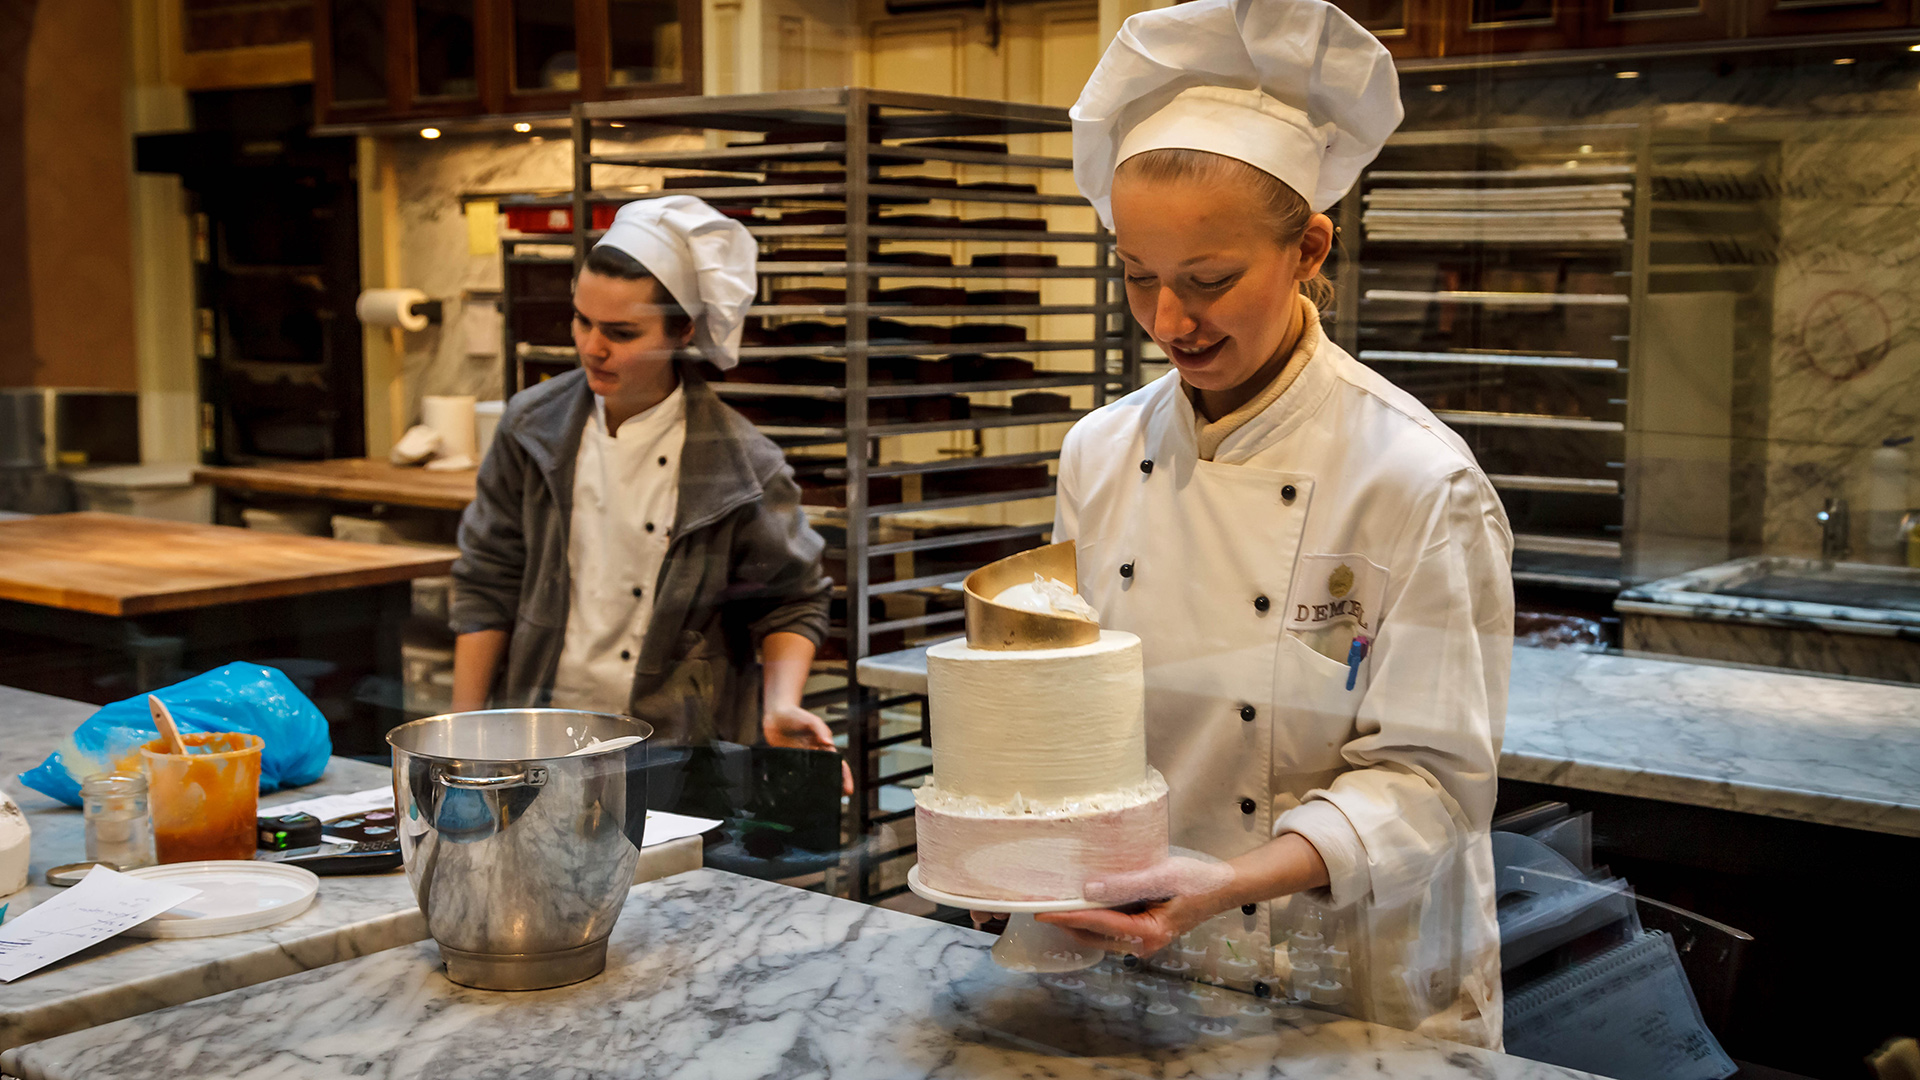 A chef takes pride in her work as she decorates a cake.